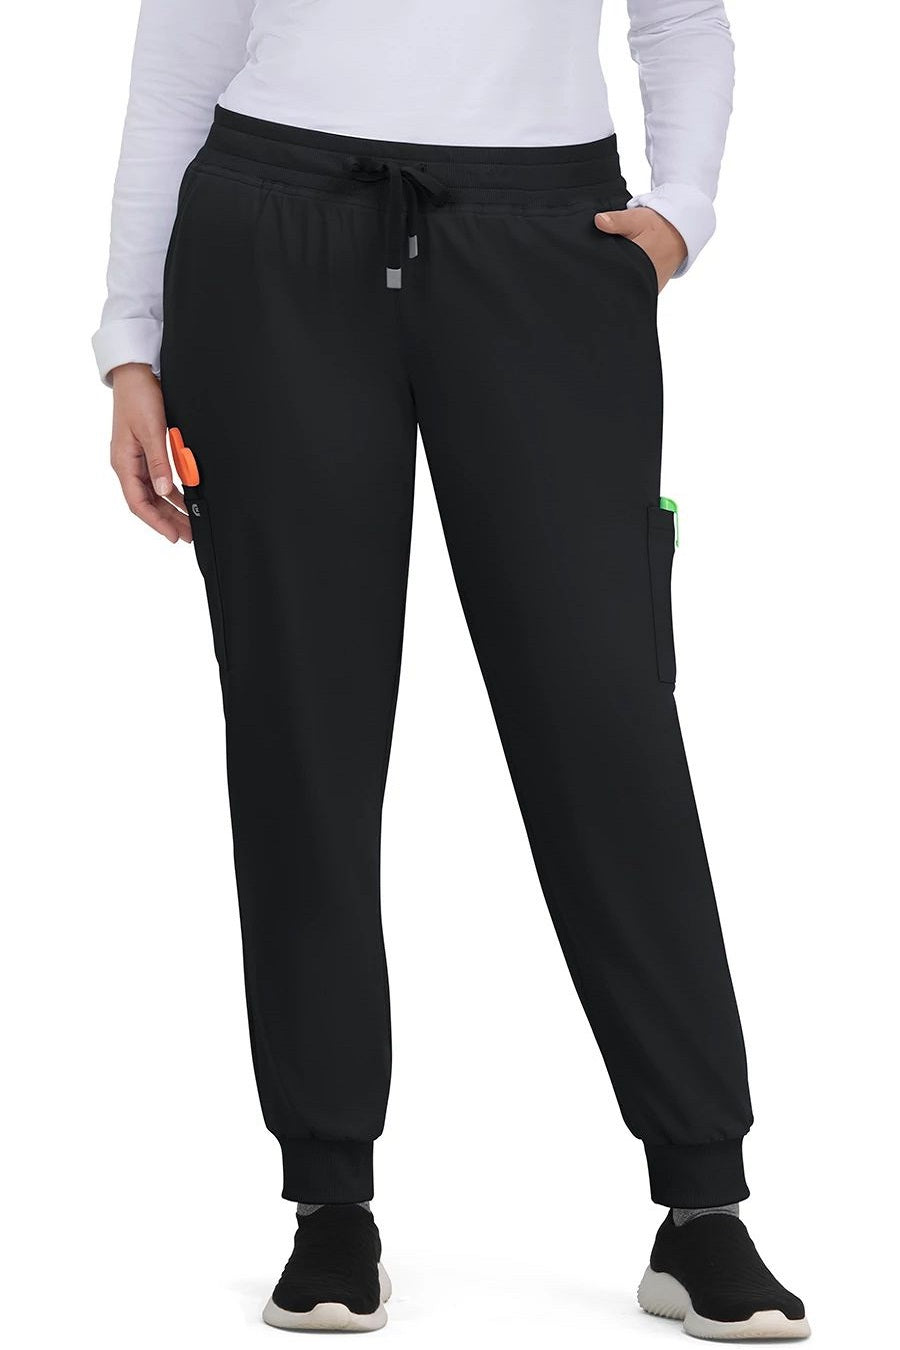 koi Scrub Pants Cureology Pulse Petite Jogger in Black at Parker's Clothing and Shoes.